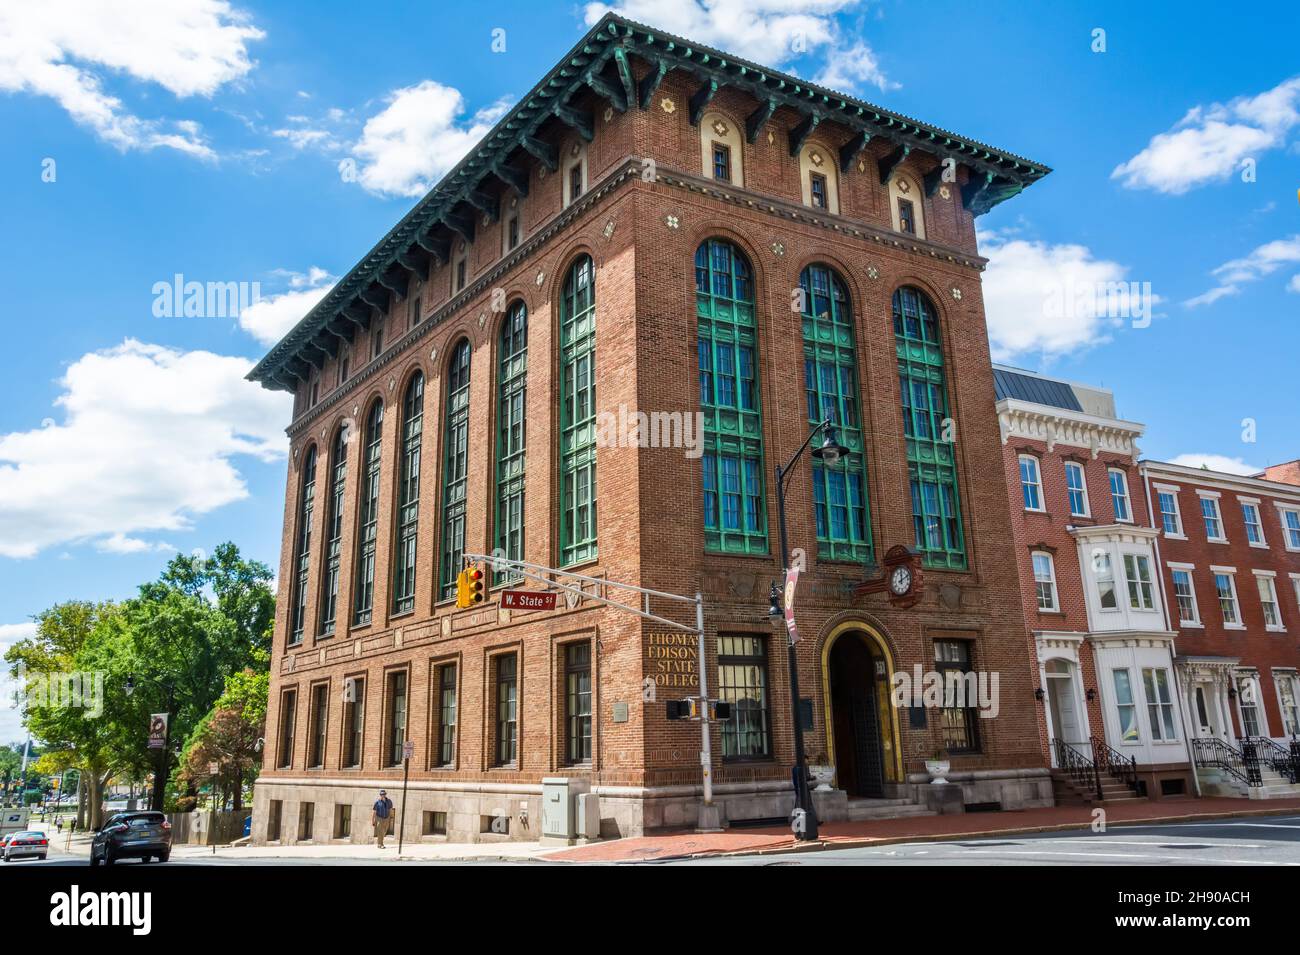 Trenton, New Jersey, United States of America – September 6, 2016. The Kelsey Building at 101-103 W. State Street, housing the Thomas Edison State Col Stock Photo